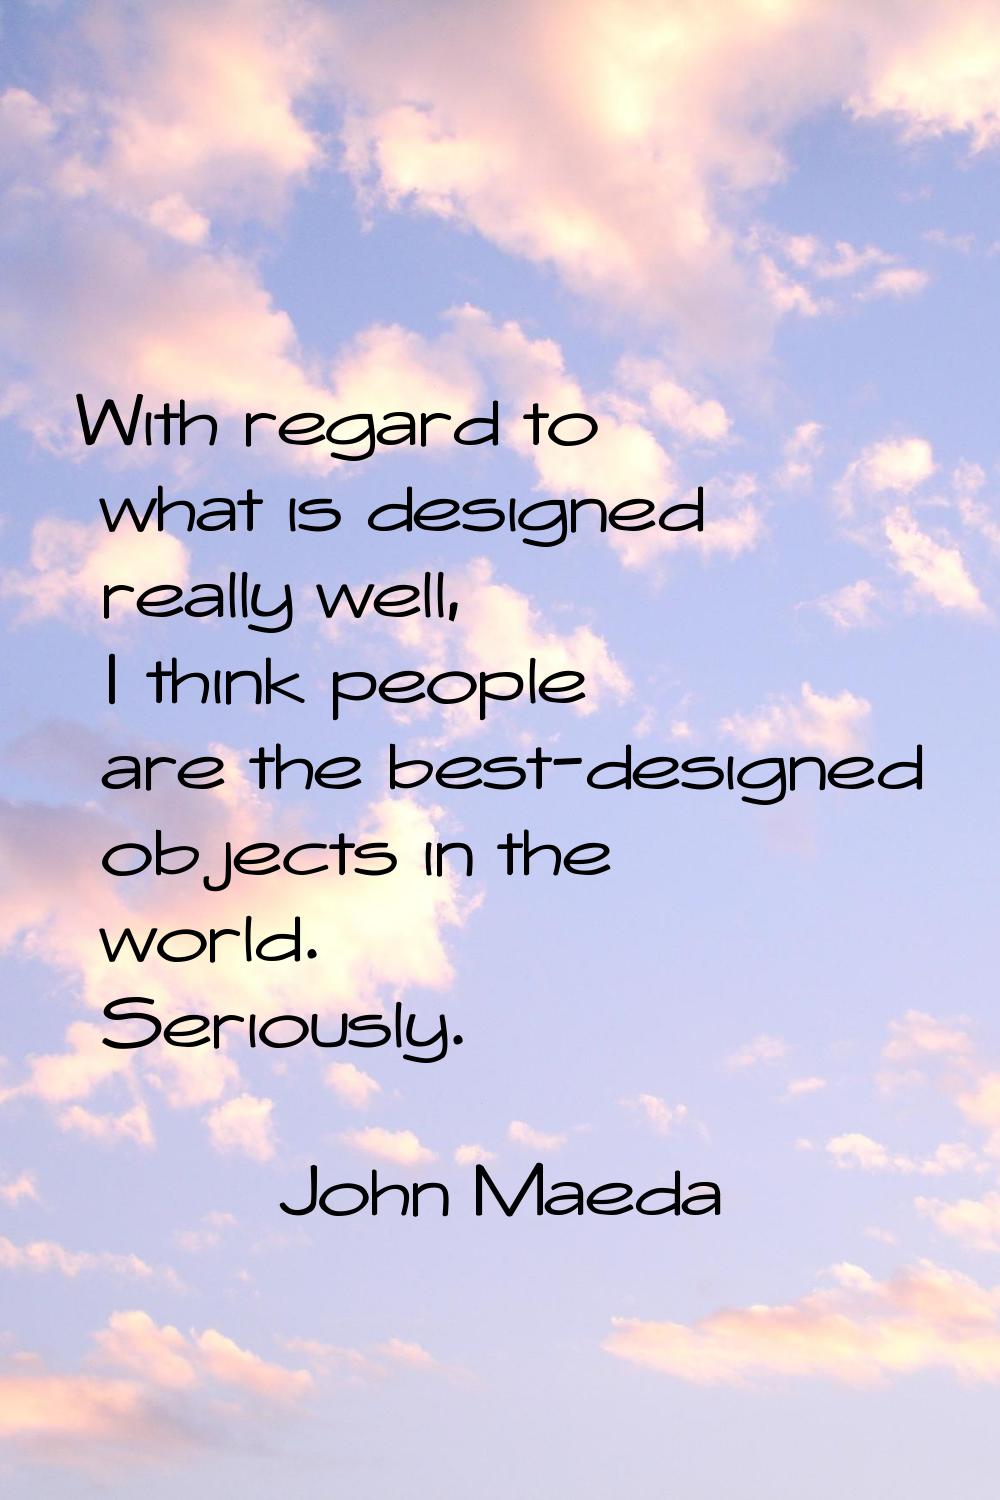 With regard to what is designed really well, I think people are the best-designed objects in the wo